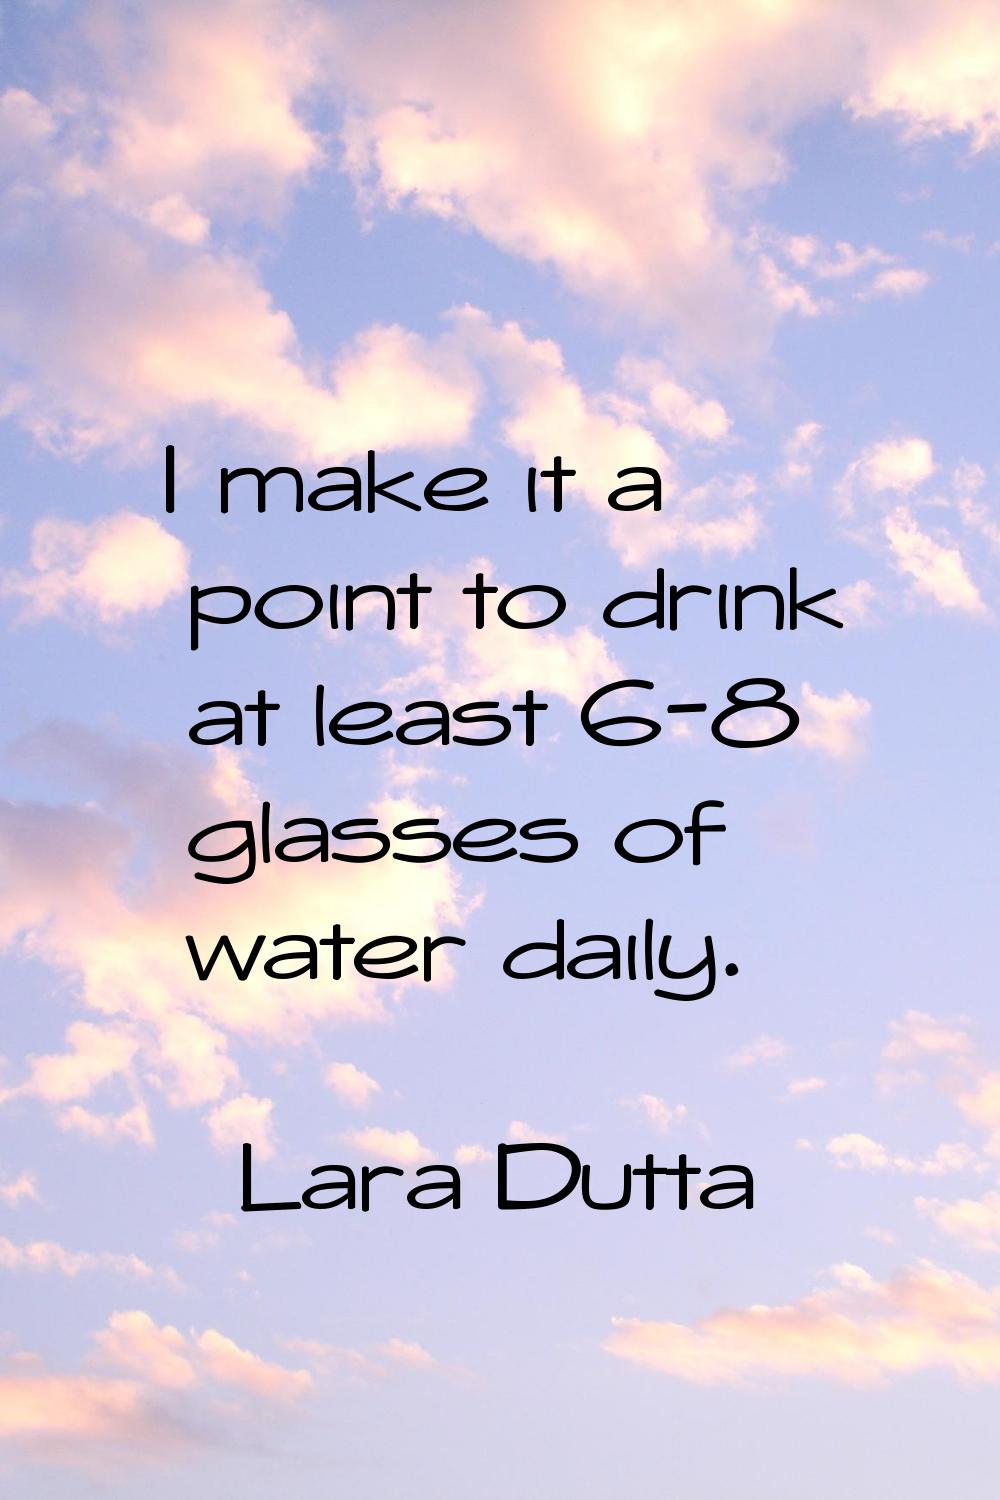 I make it a point to drink at least 6-8 glasses of water daily.